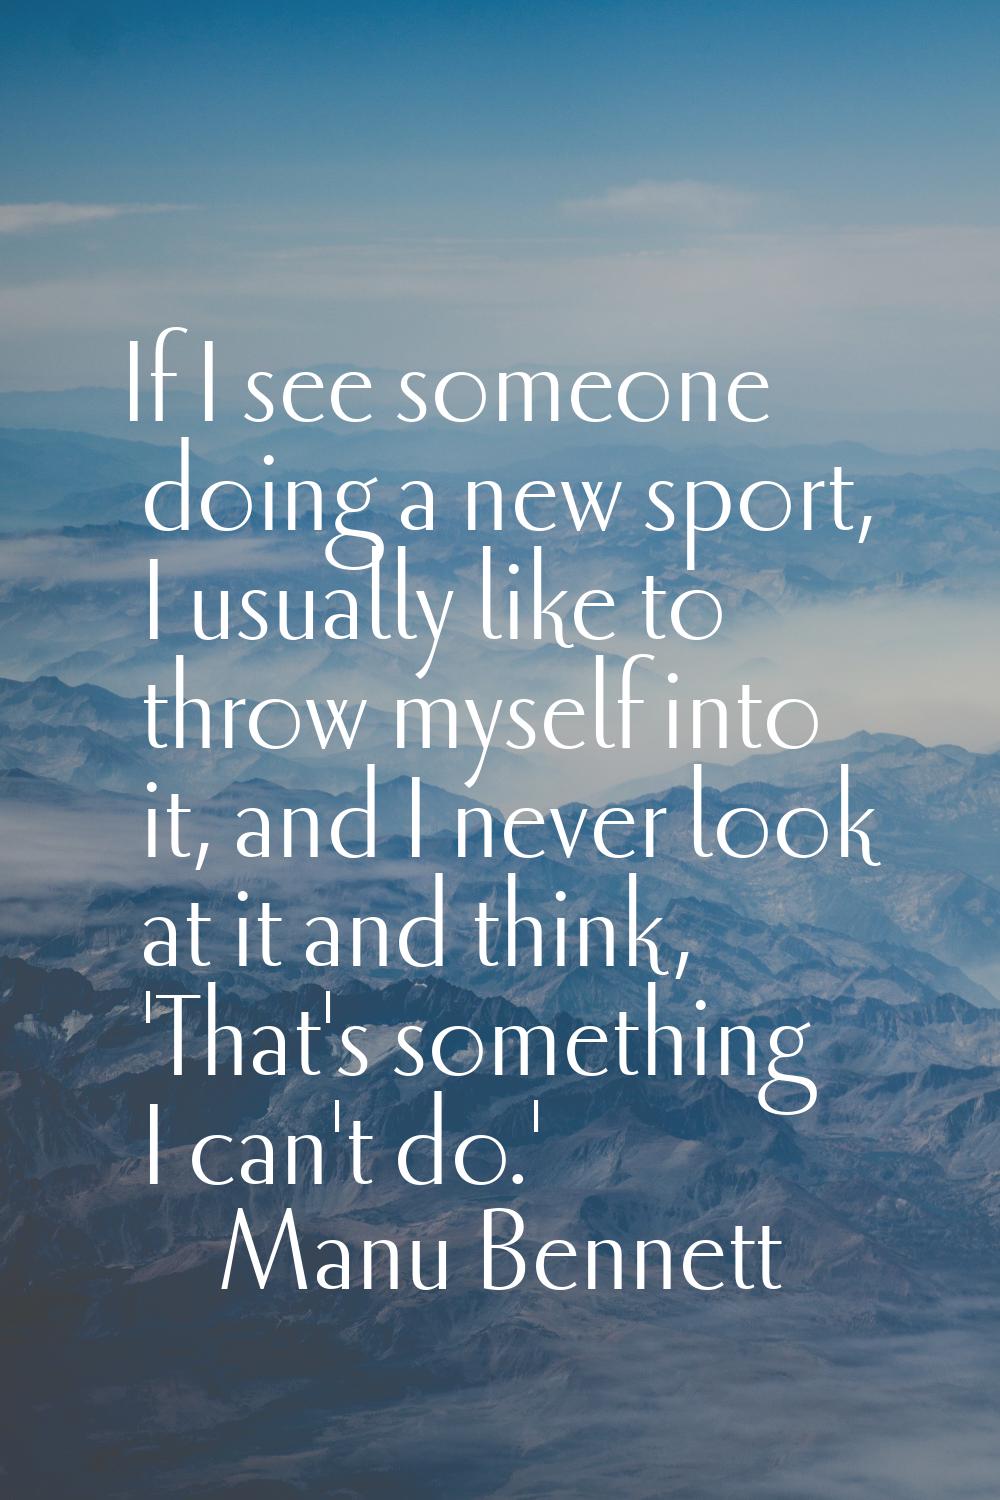 If I see someone doing a new sport, I usually like to throw myself into it, and I never look at it 